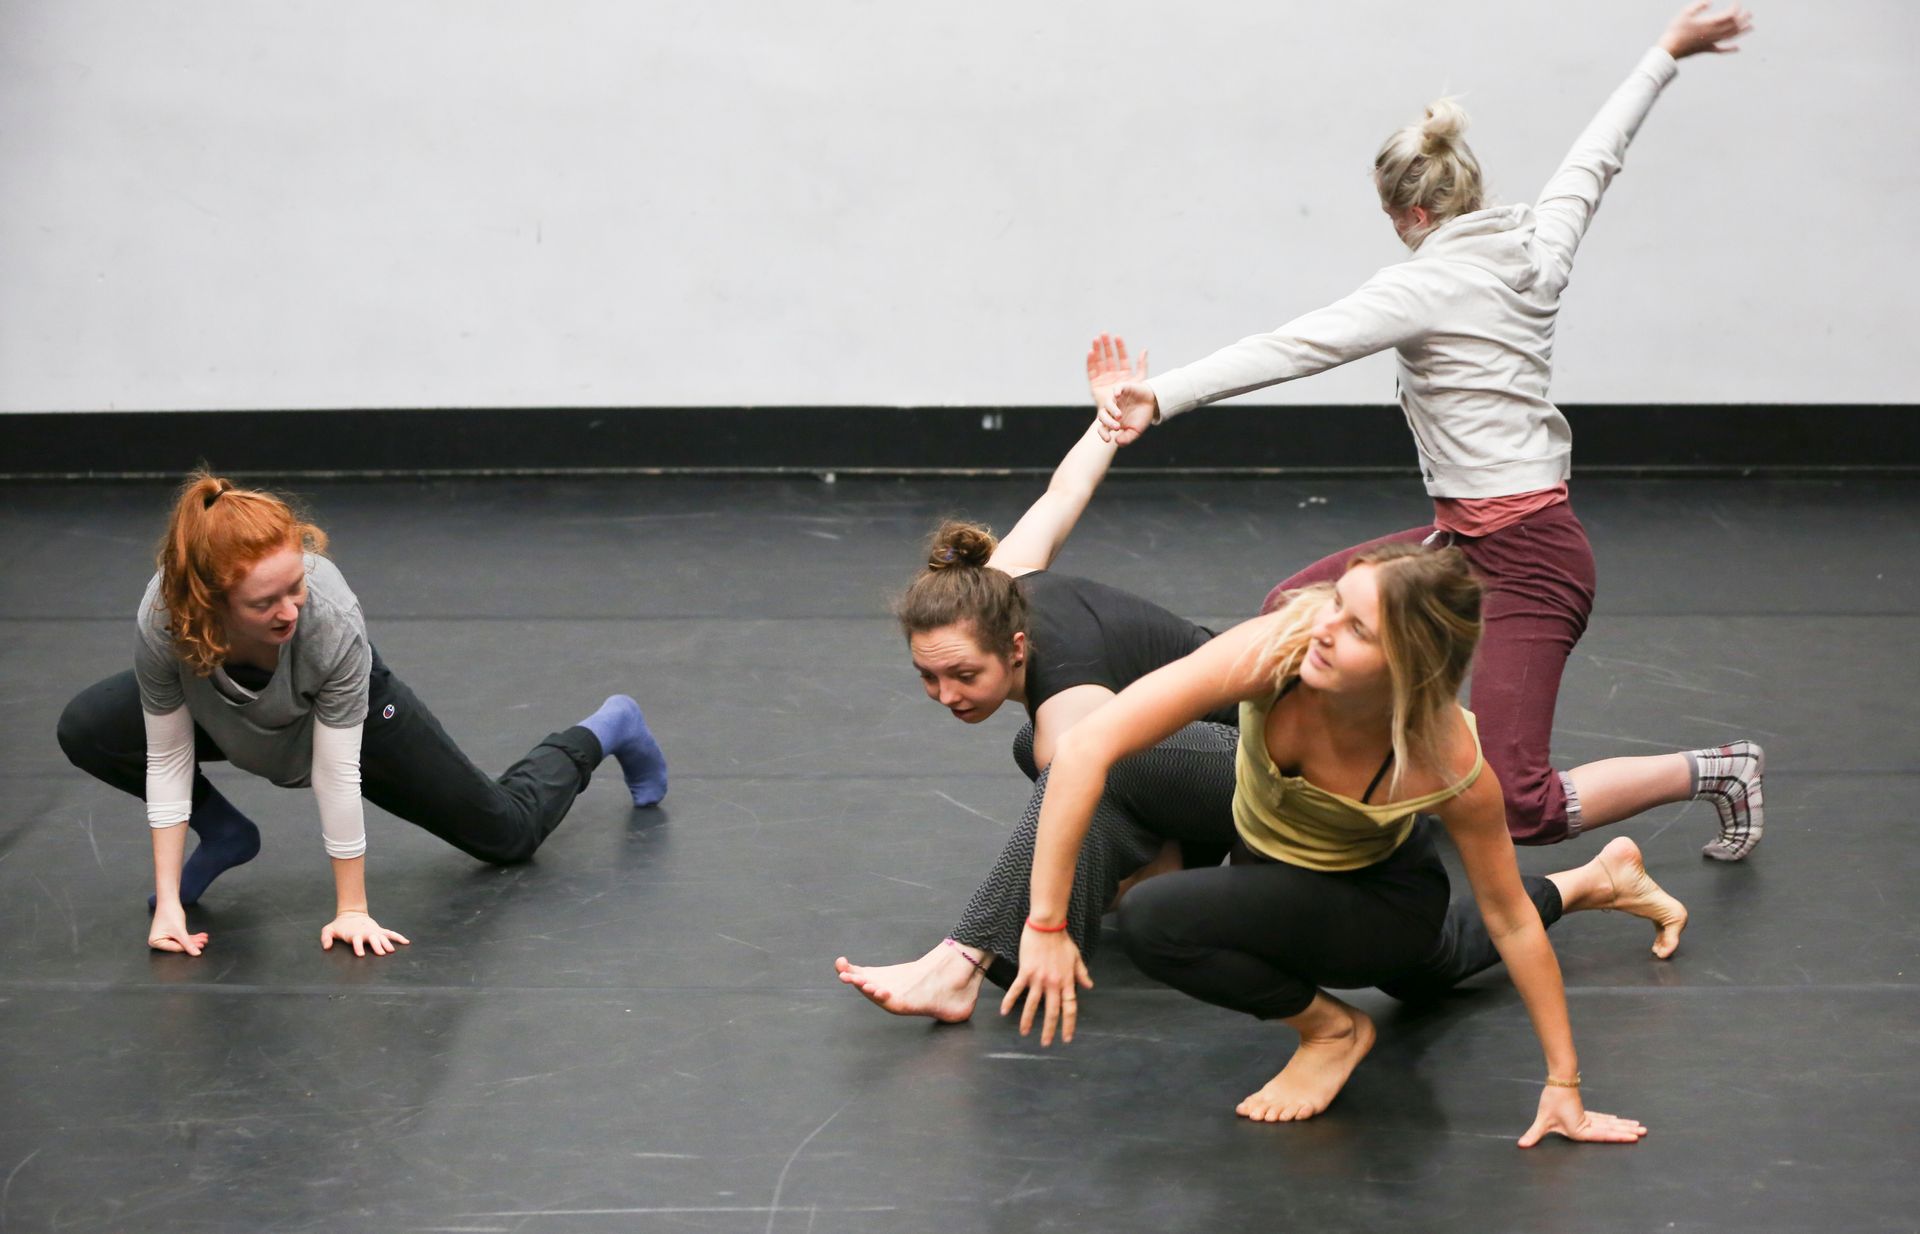 Contemporary dance class practicing fluid choreographic moves together